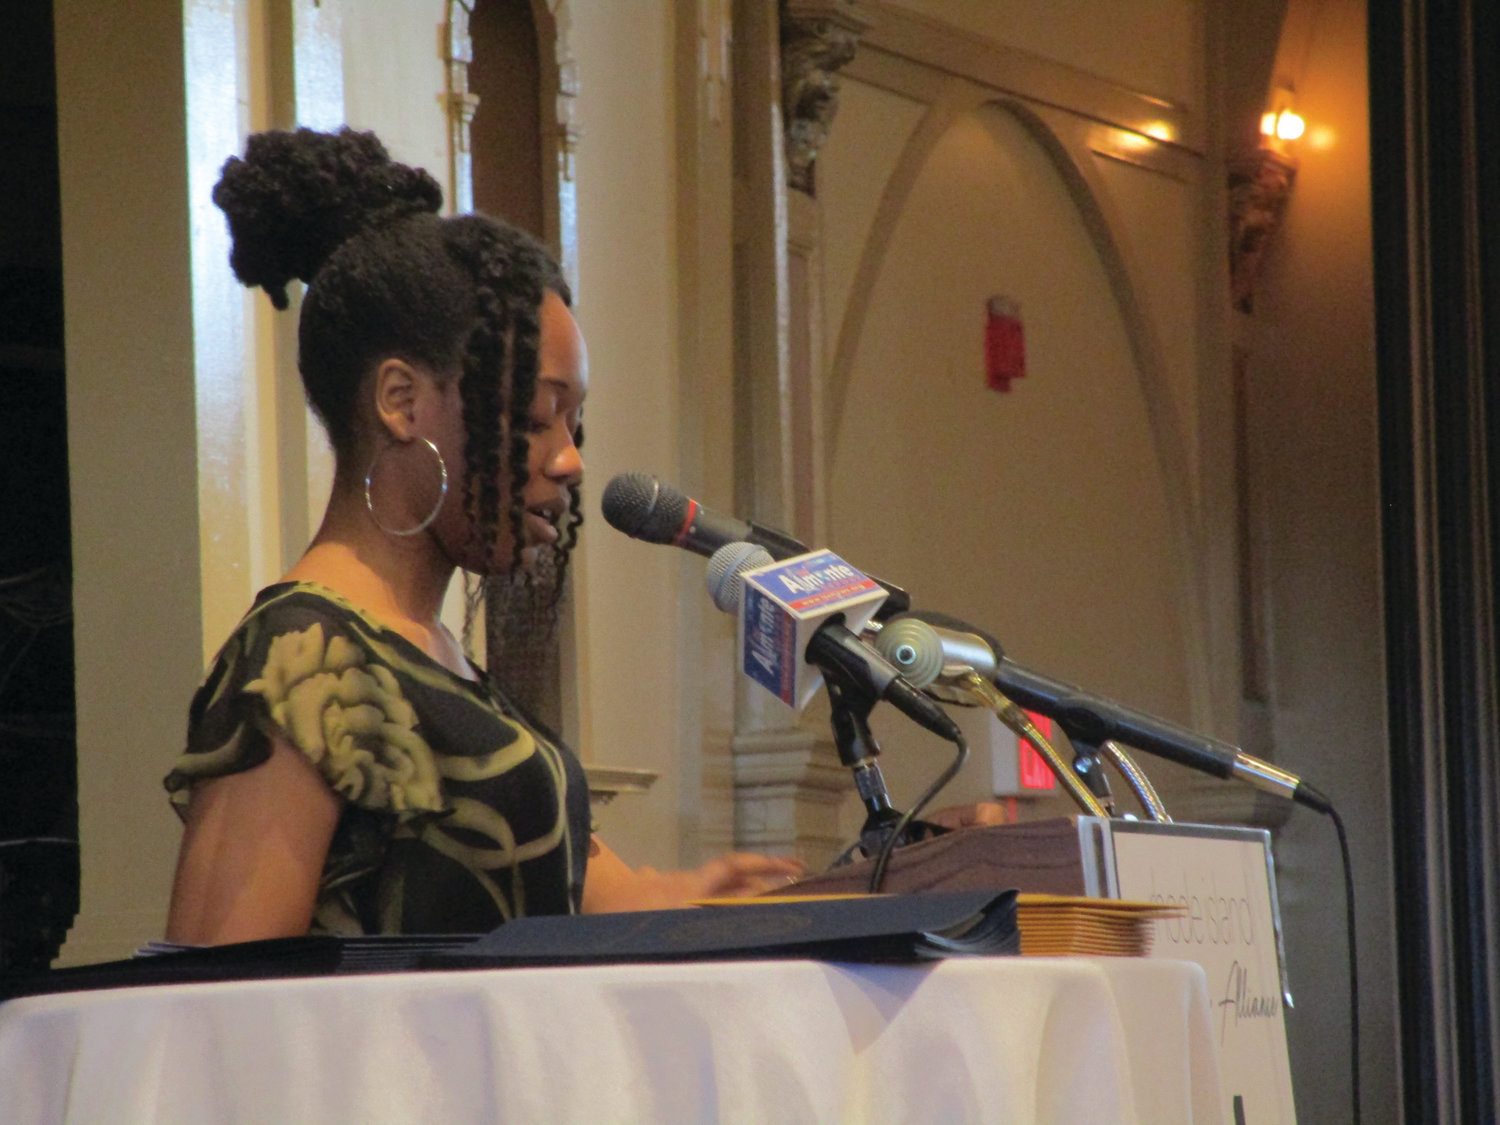 FUTURE LEADER: Scholarship recipient Blessed Sherrif shares a portion of her essay during Monday’s breakfast.